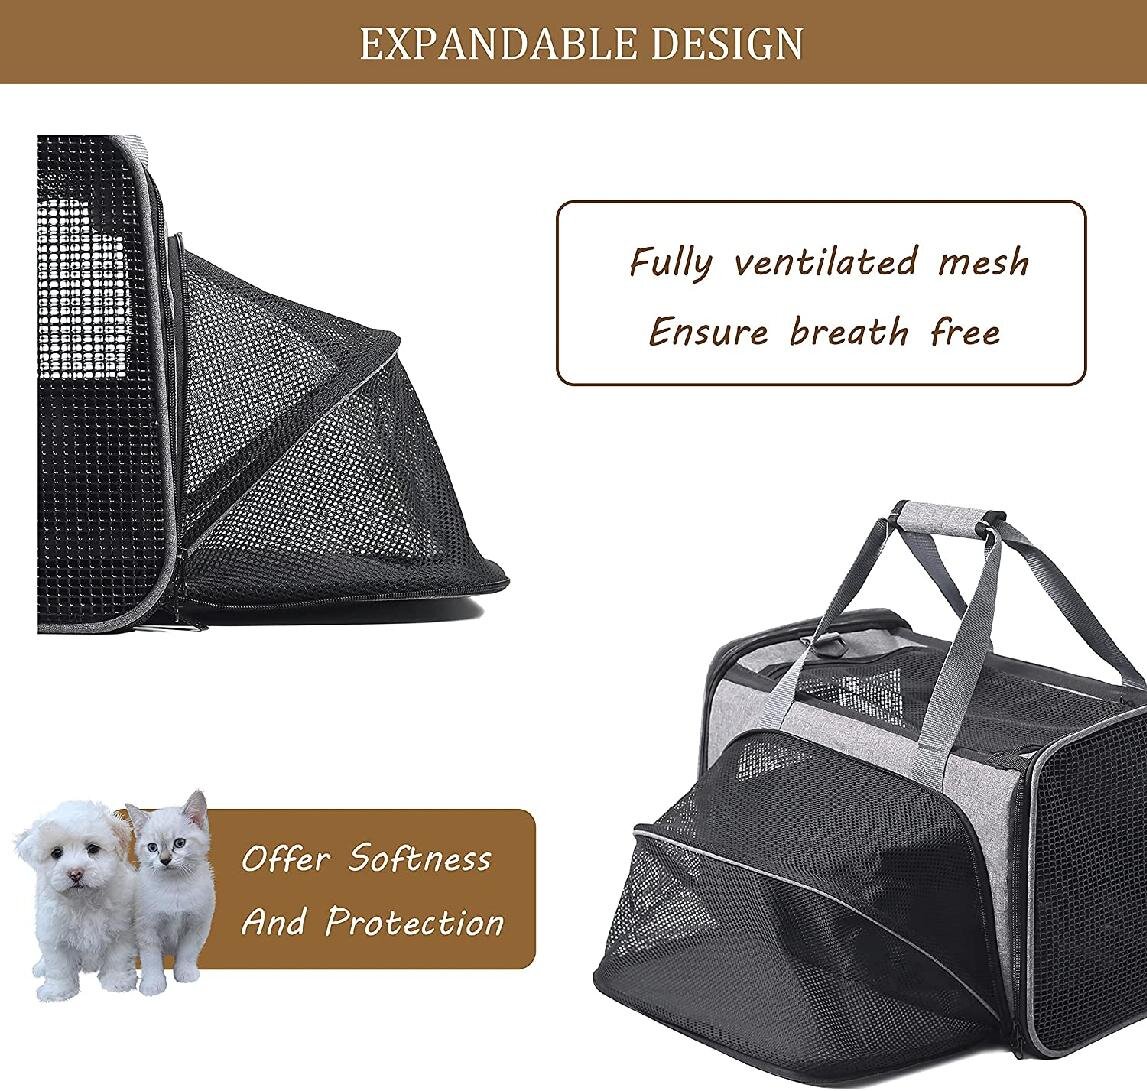 Cat Carrier Dog Carrier Portable Pet Transport Bag with Adjustable Shoulder Strap Mesh Window Reflective Strip and Removable Cozy Soft Cushion Pet Travel Carrier Airline Approved for Small Dogs Cats 